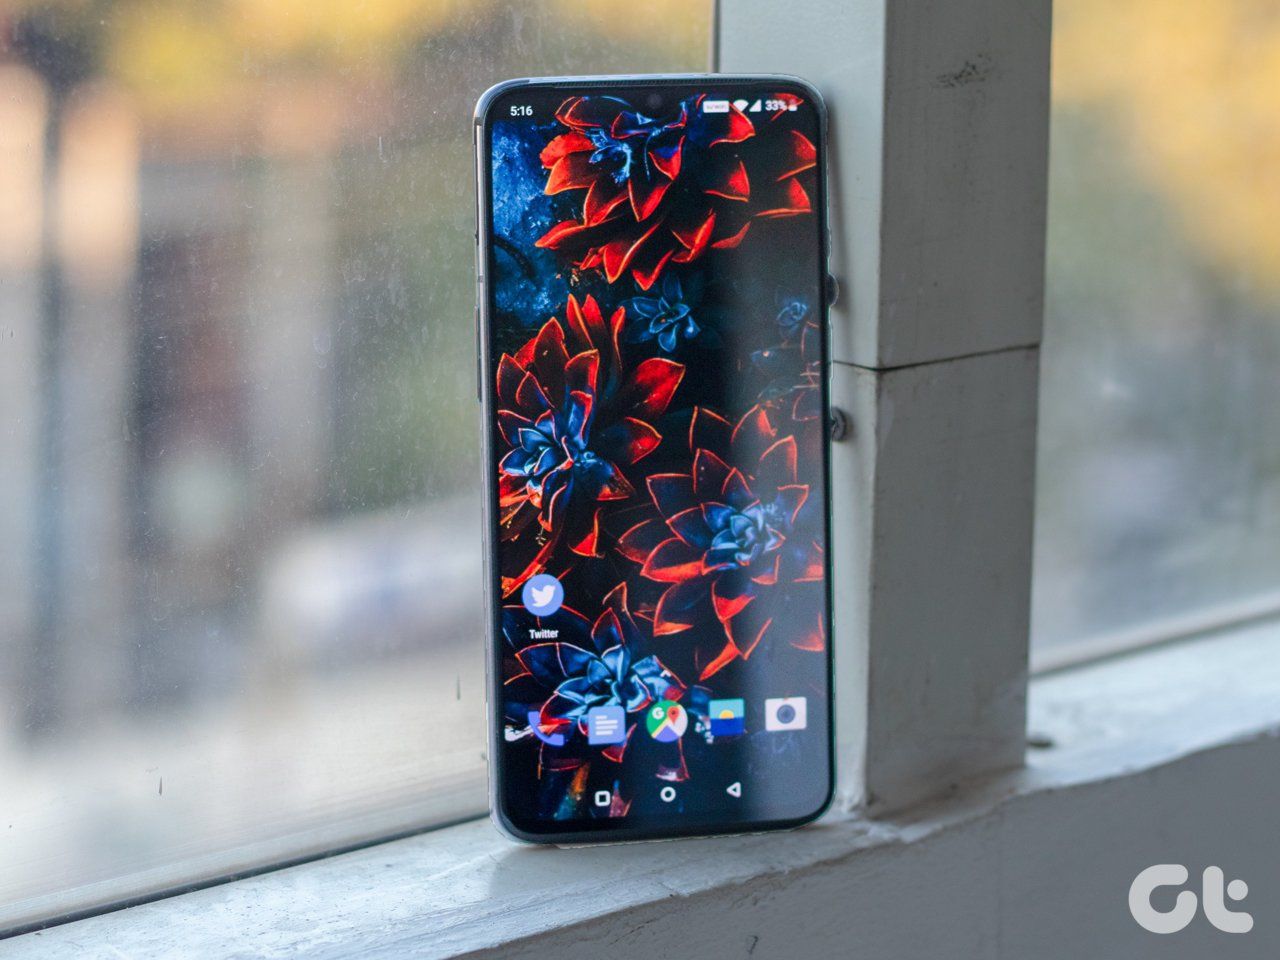 Best Wallpaper Android Apps in 2020